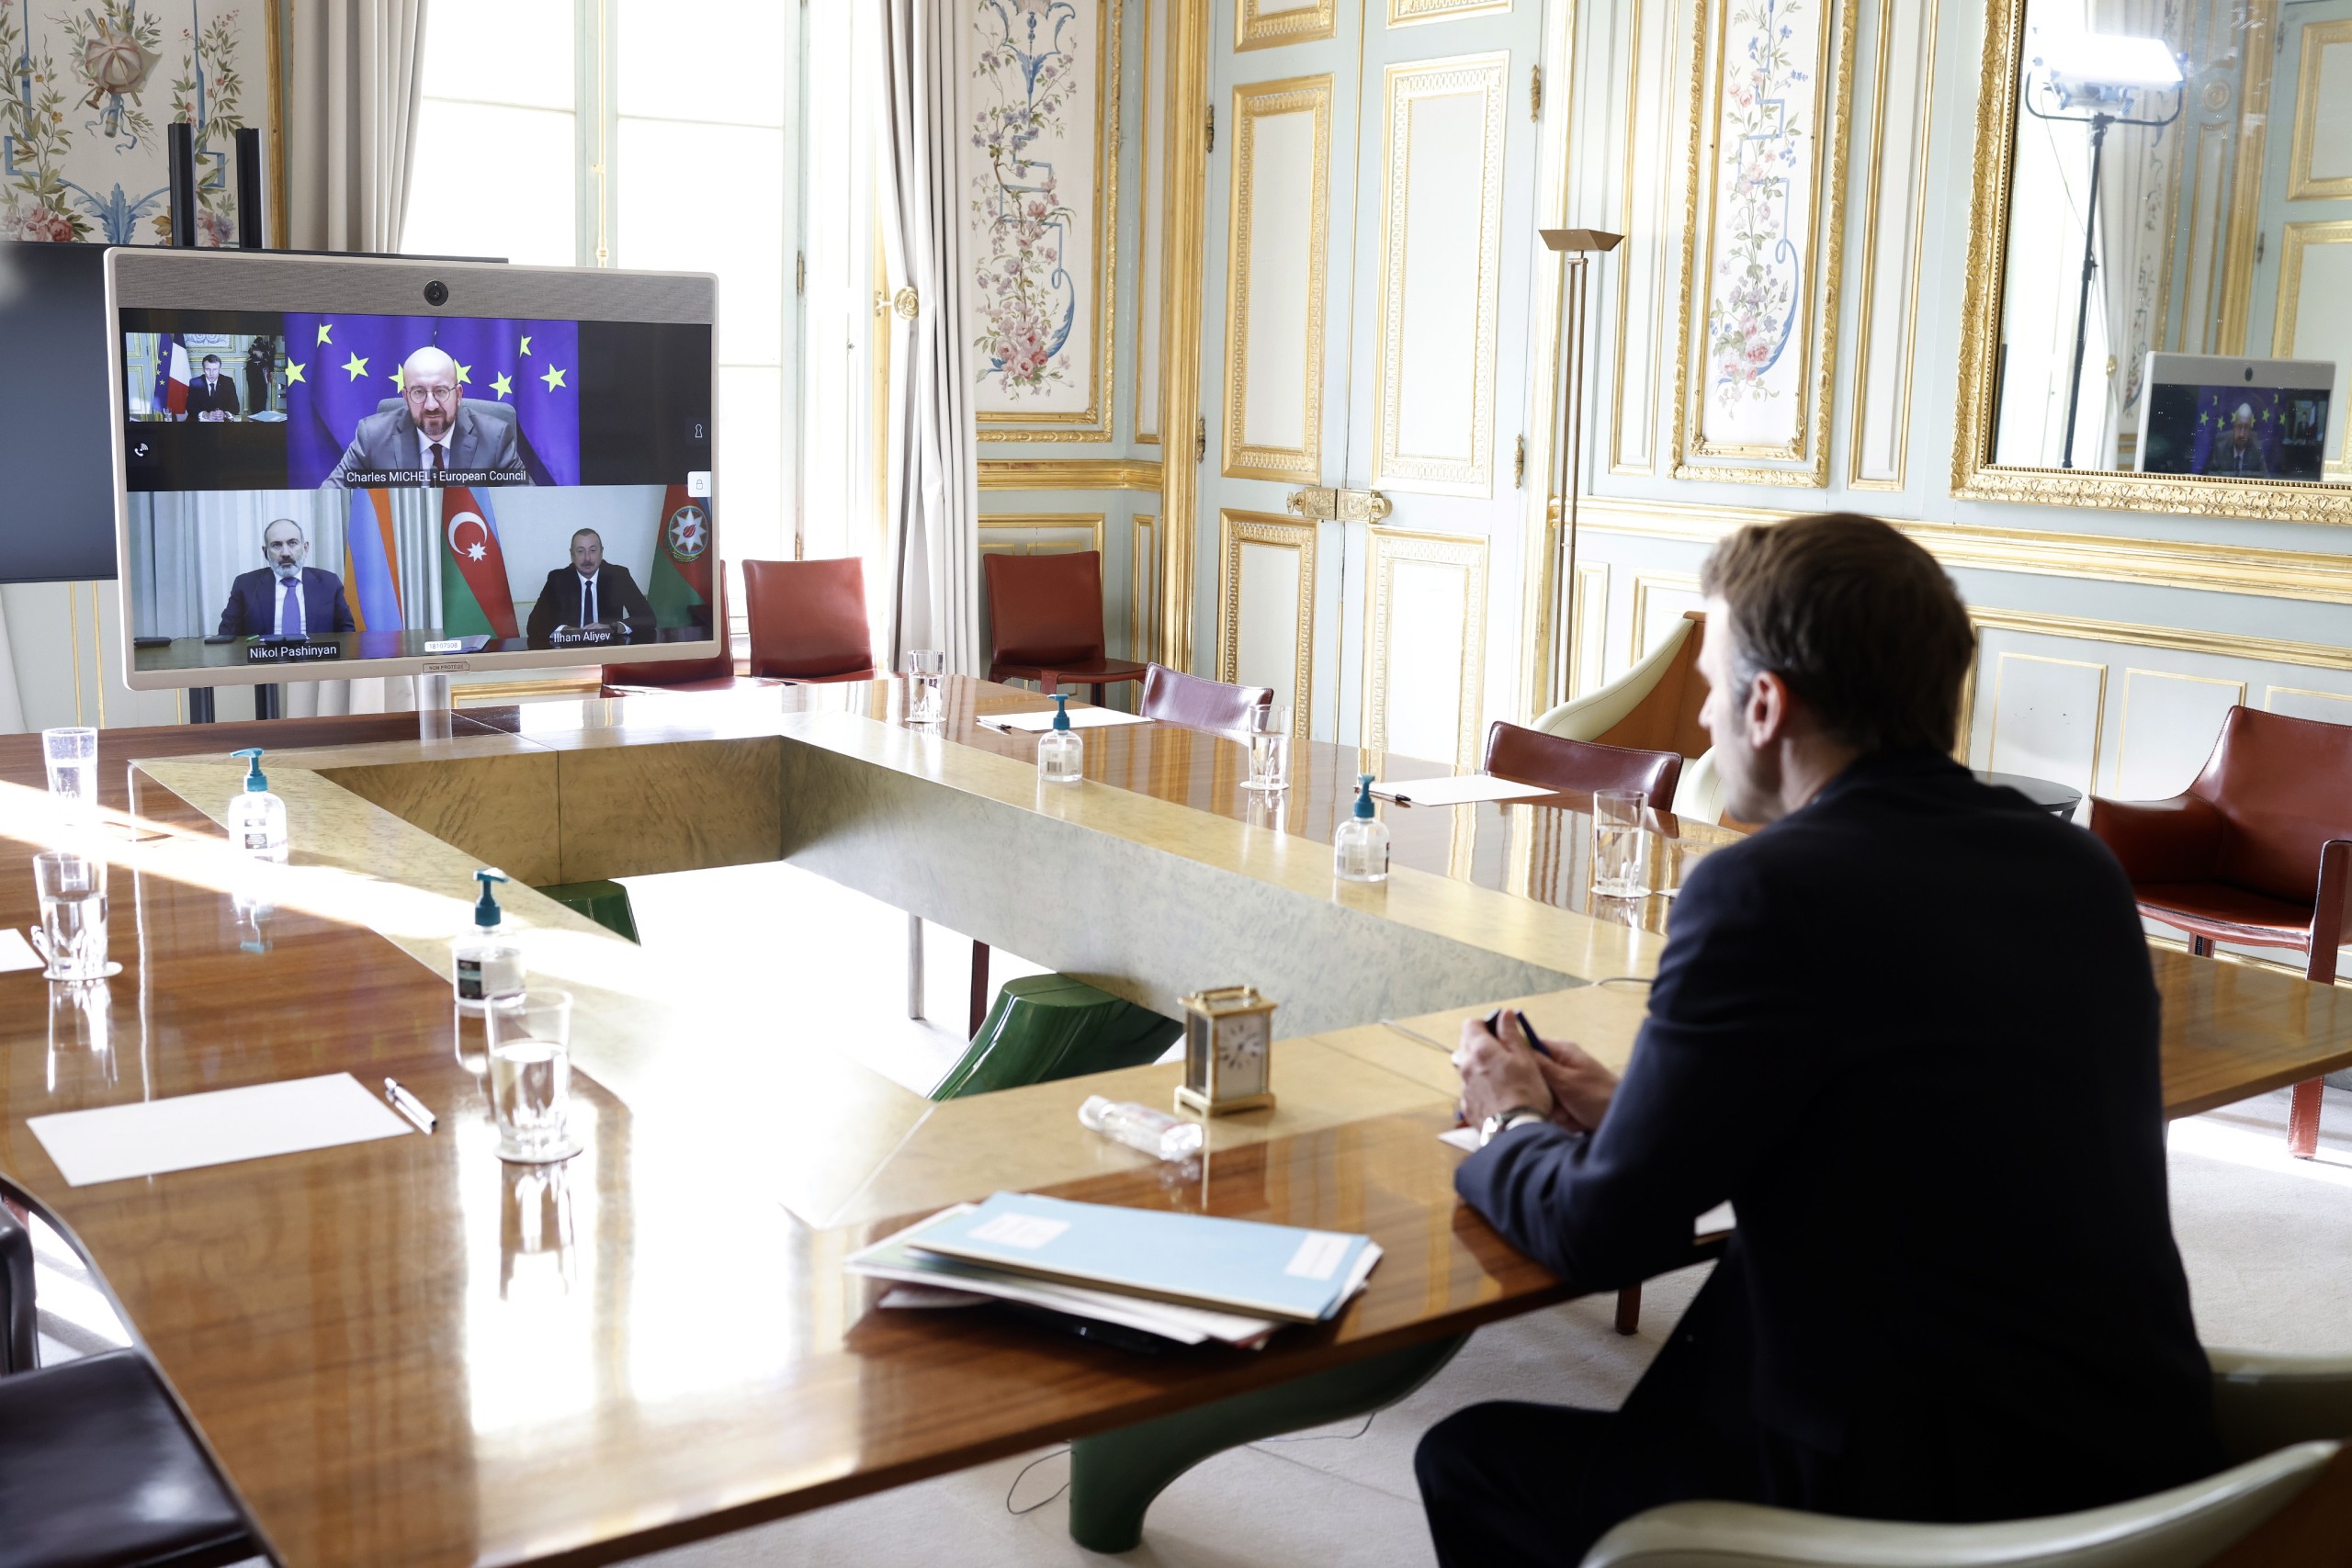 epa09727524 French President Emmanuel Macron (L) holds a video conference meeting with Armenian Prime Minister Nikol Pachinian (screen, L), Azerbaijan President Ilham Aliev (screen, R) and European Council President Charles Michel (screen, up) at the Elysee Palace in Paris, France, 04 February 2022.  EPA/YOAN VALAT / POOL